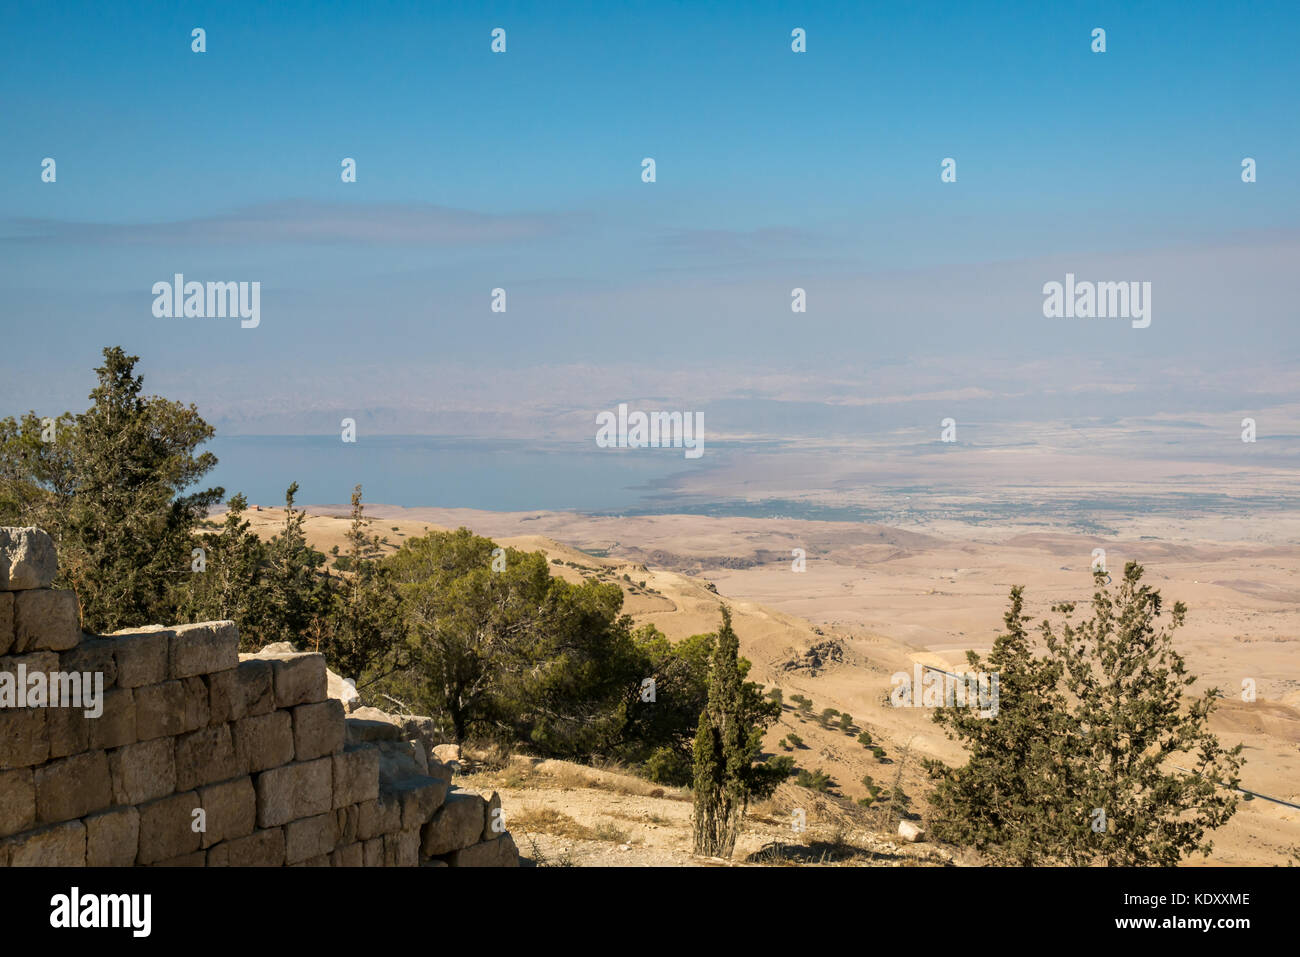 Mount Nebo religious site, Jordan, the desert valley towards Israel and Dead Sea in the distance, as seen by Moses in Bible story of the promised land Stock Photo